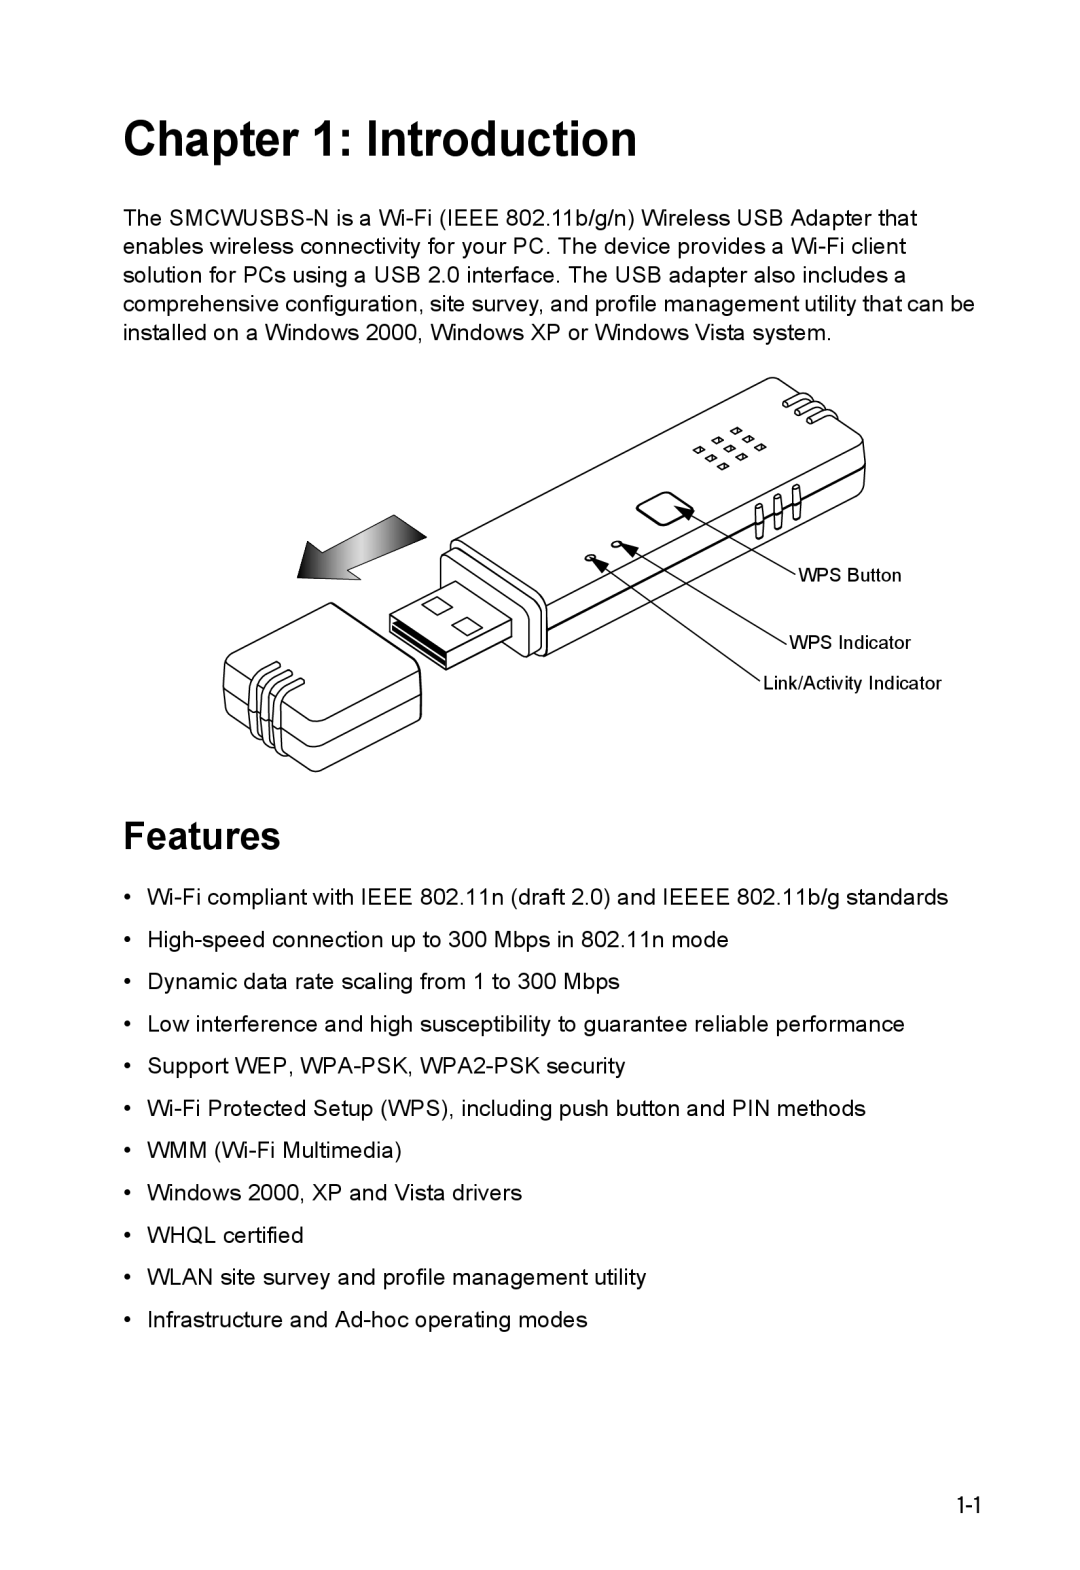 SMC Networks SMCWUSBS-N manual Introduction, Features 